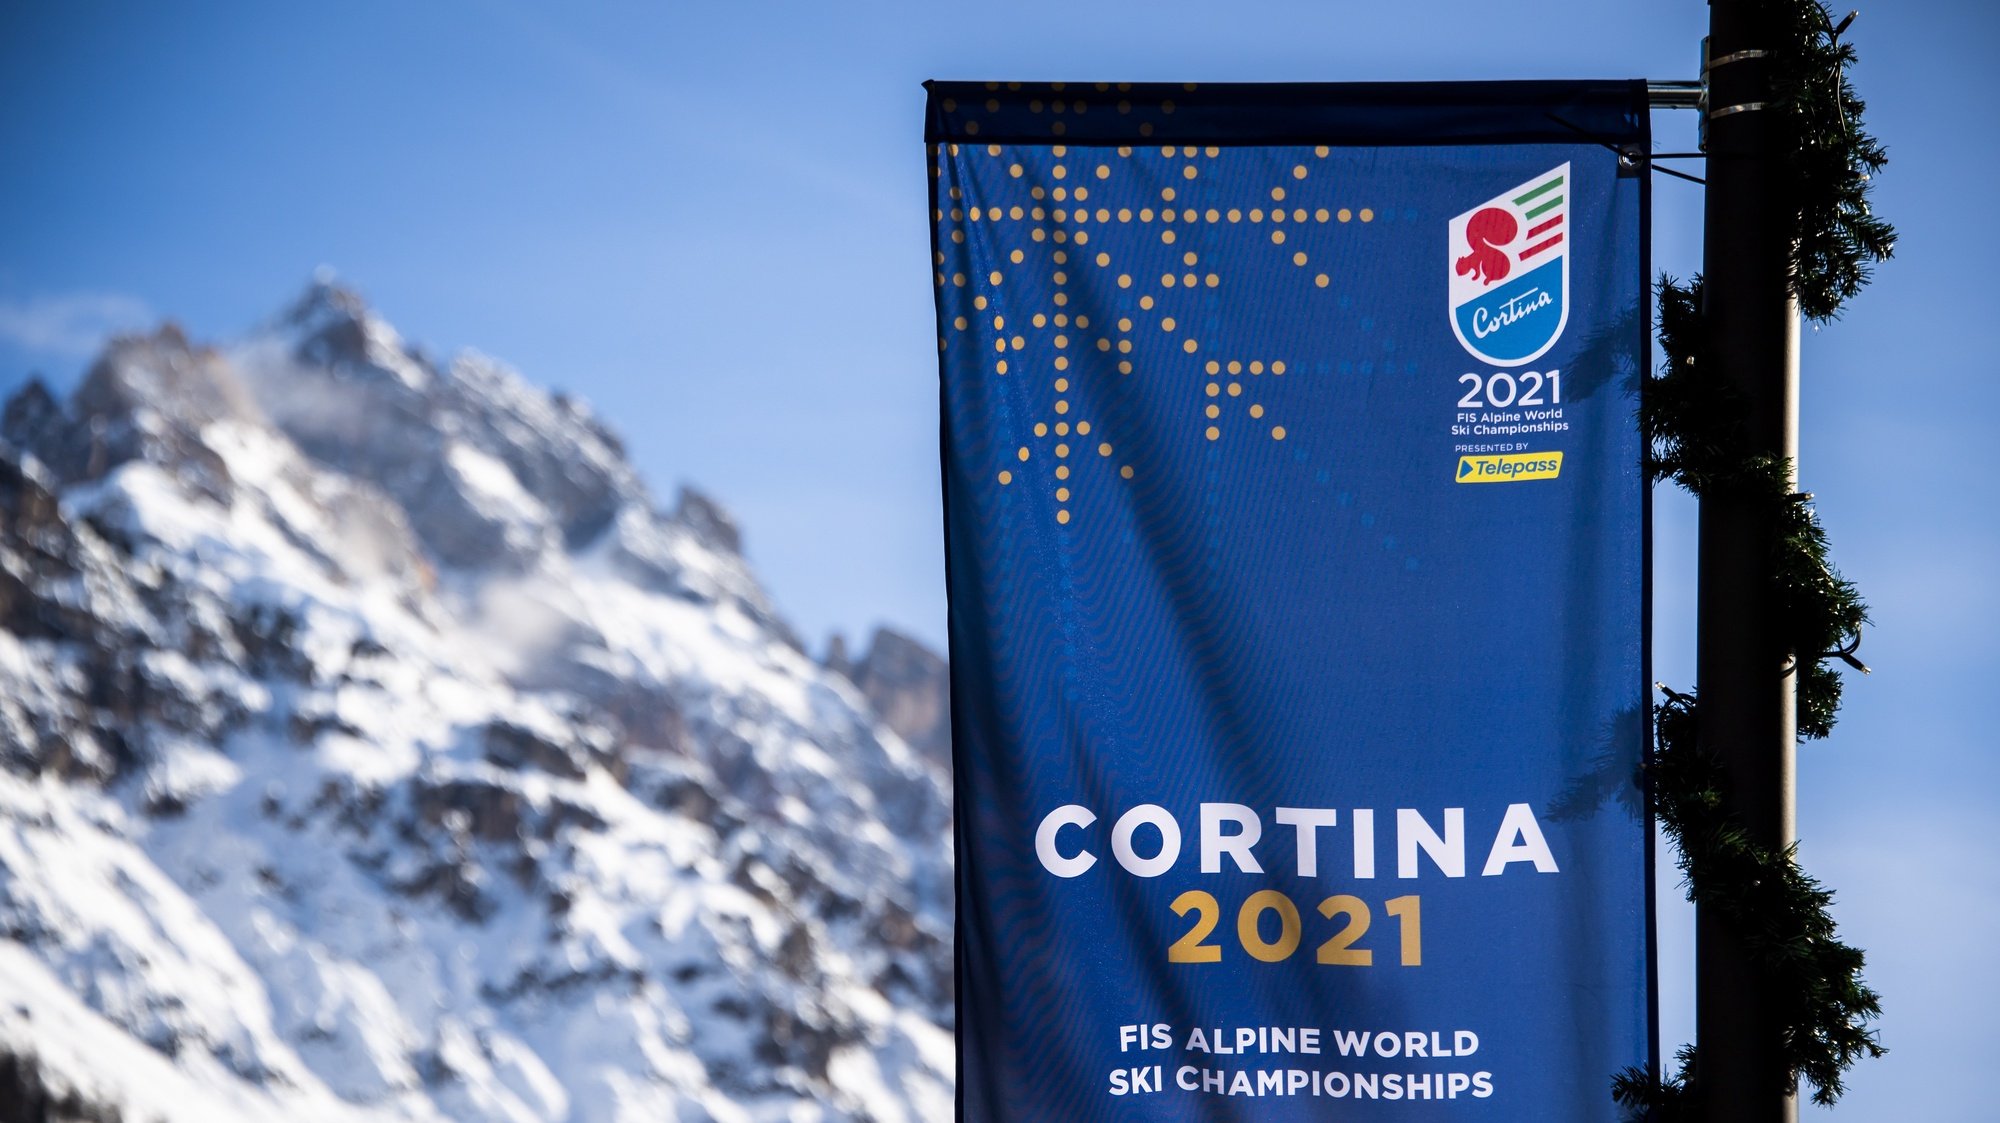 epa08989079 A banner with the logo Cortina 2021 is pictured in Cortina d&#039;Ampezzo, Italy, 05 February 2021. The 2021 FIS Alpine World Ski Championships will be held in Cortina d&#039;Ampezzo from 07 to 21 February 2021.  EPA/JEAN-CHRISTOPHE BOTT